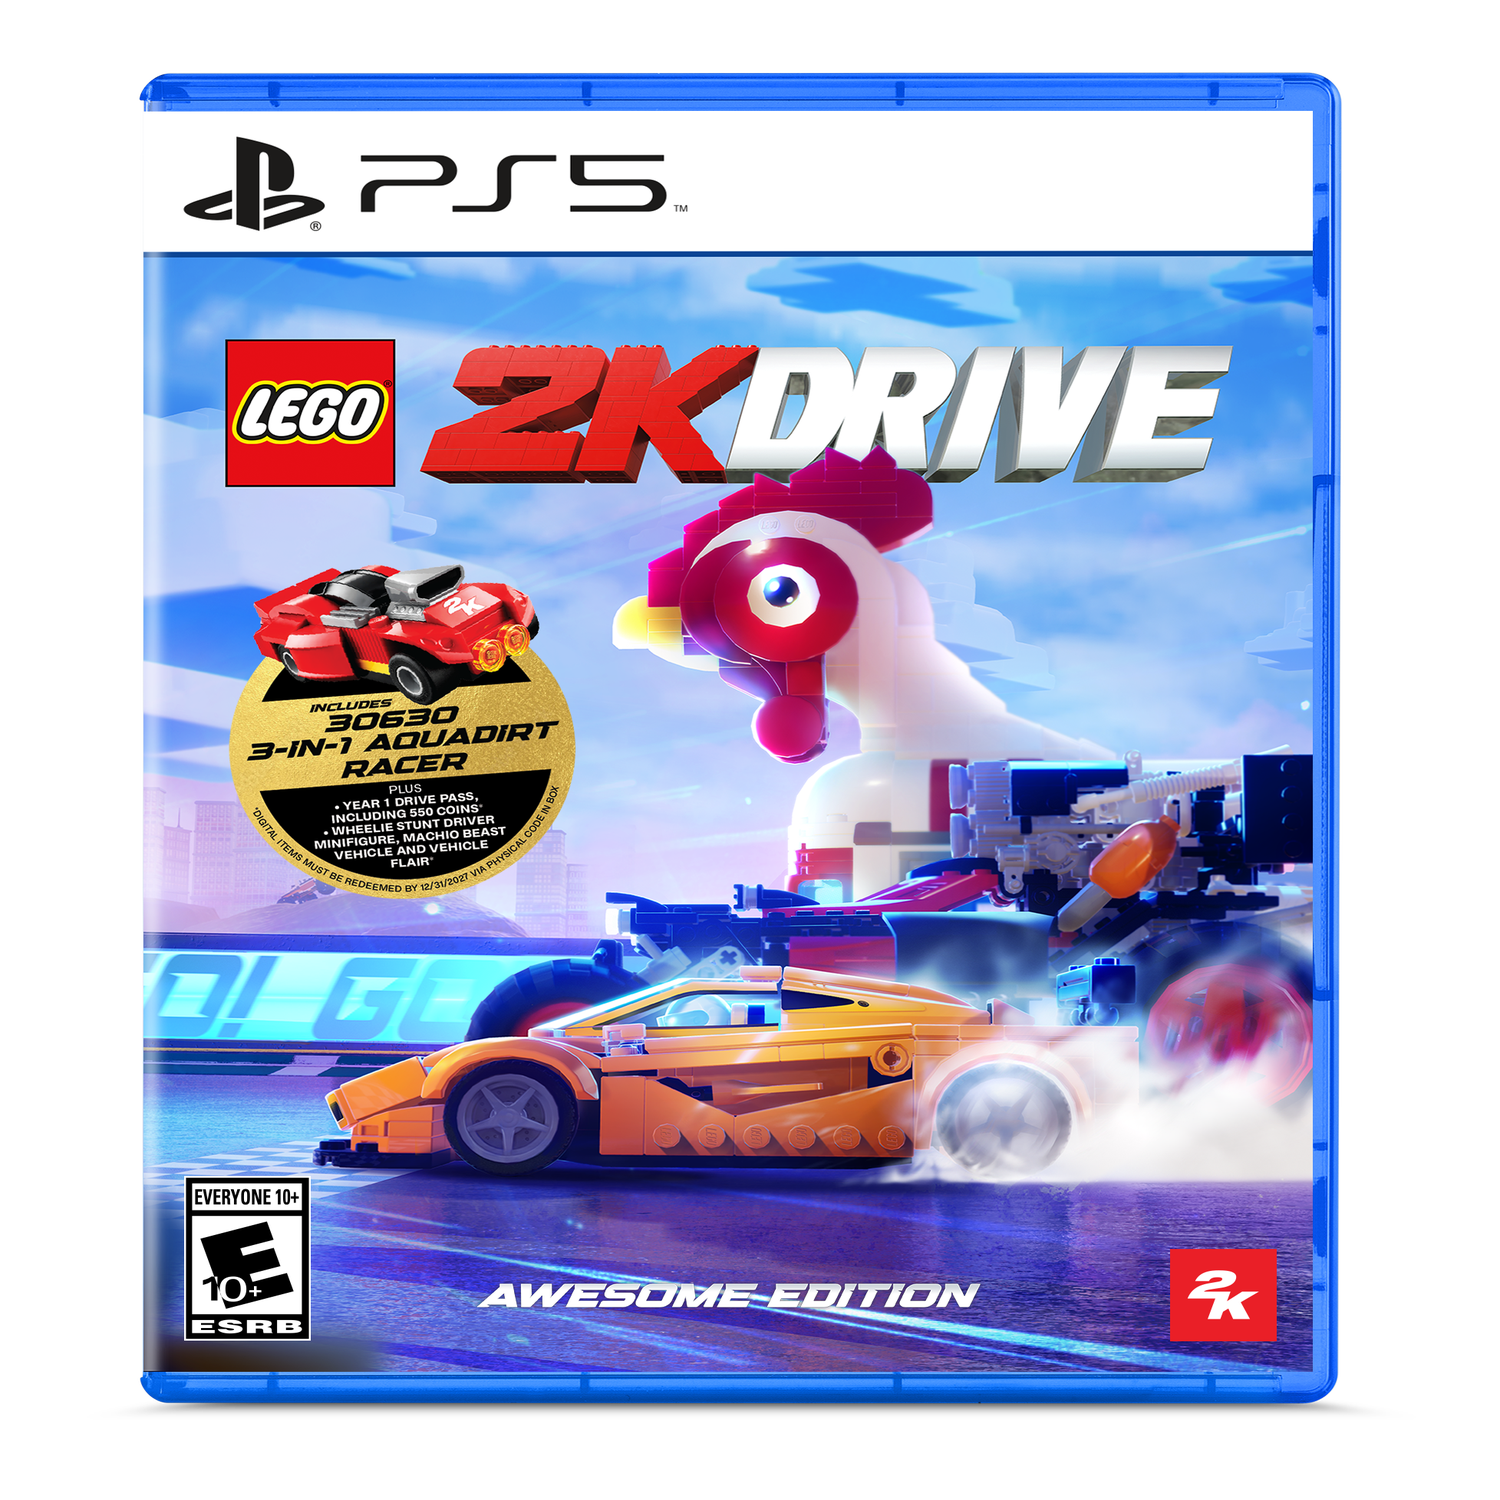 2K Drive Awesome Buy | | US PlayStation® Other 5007933 LEGO® the at – Official Edition online Shop 5